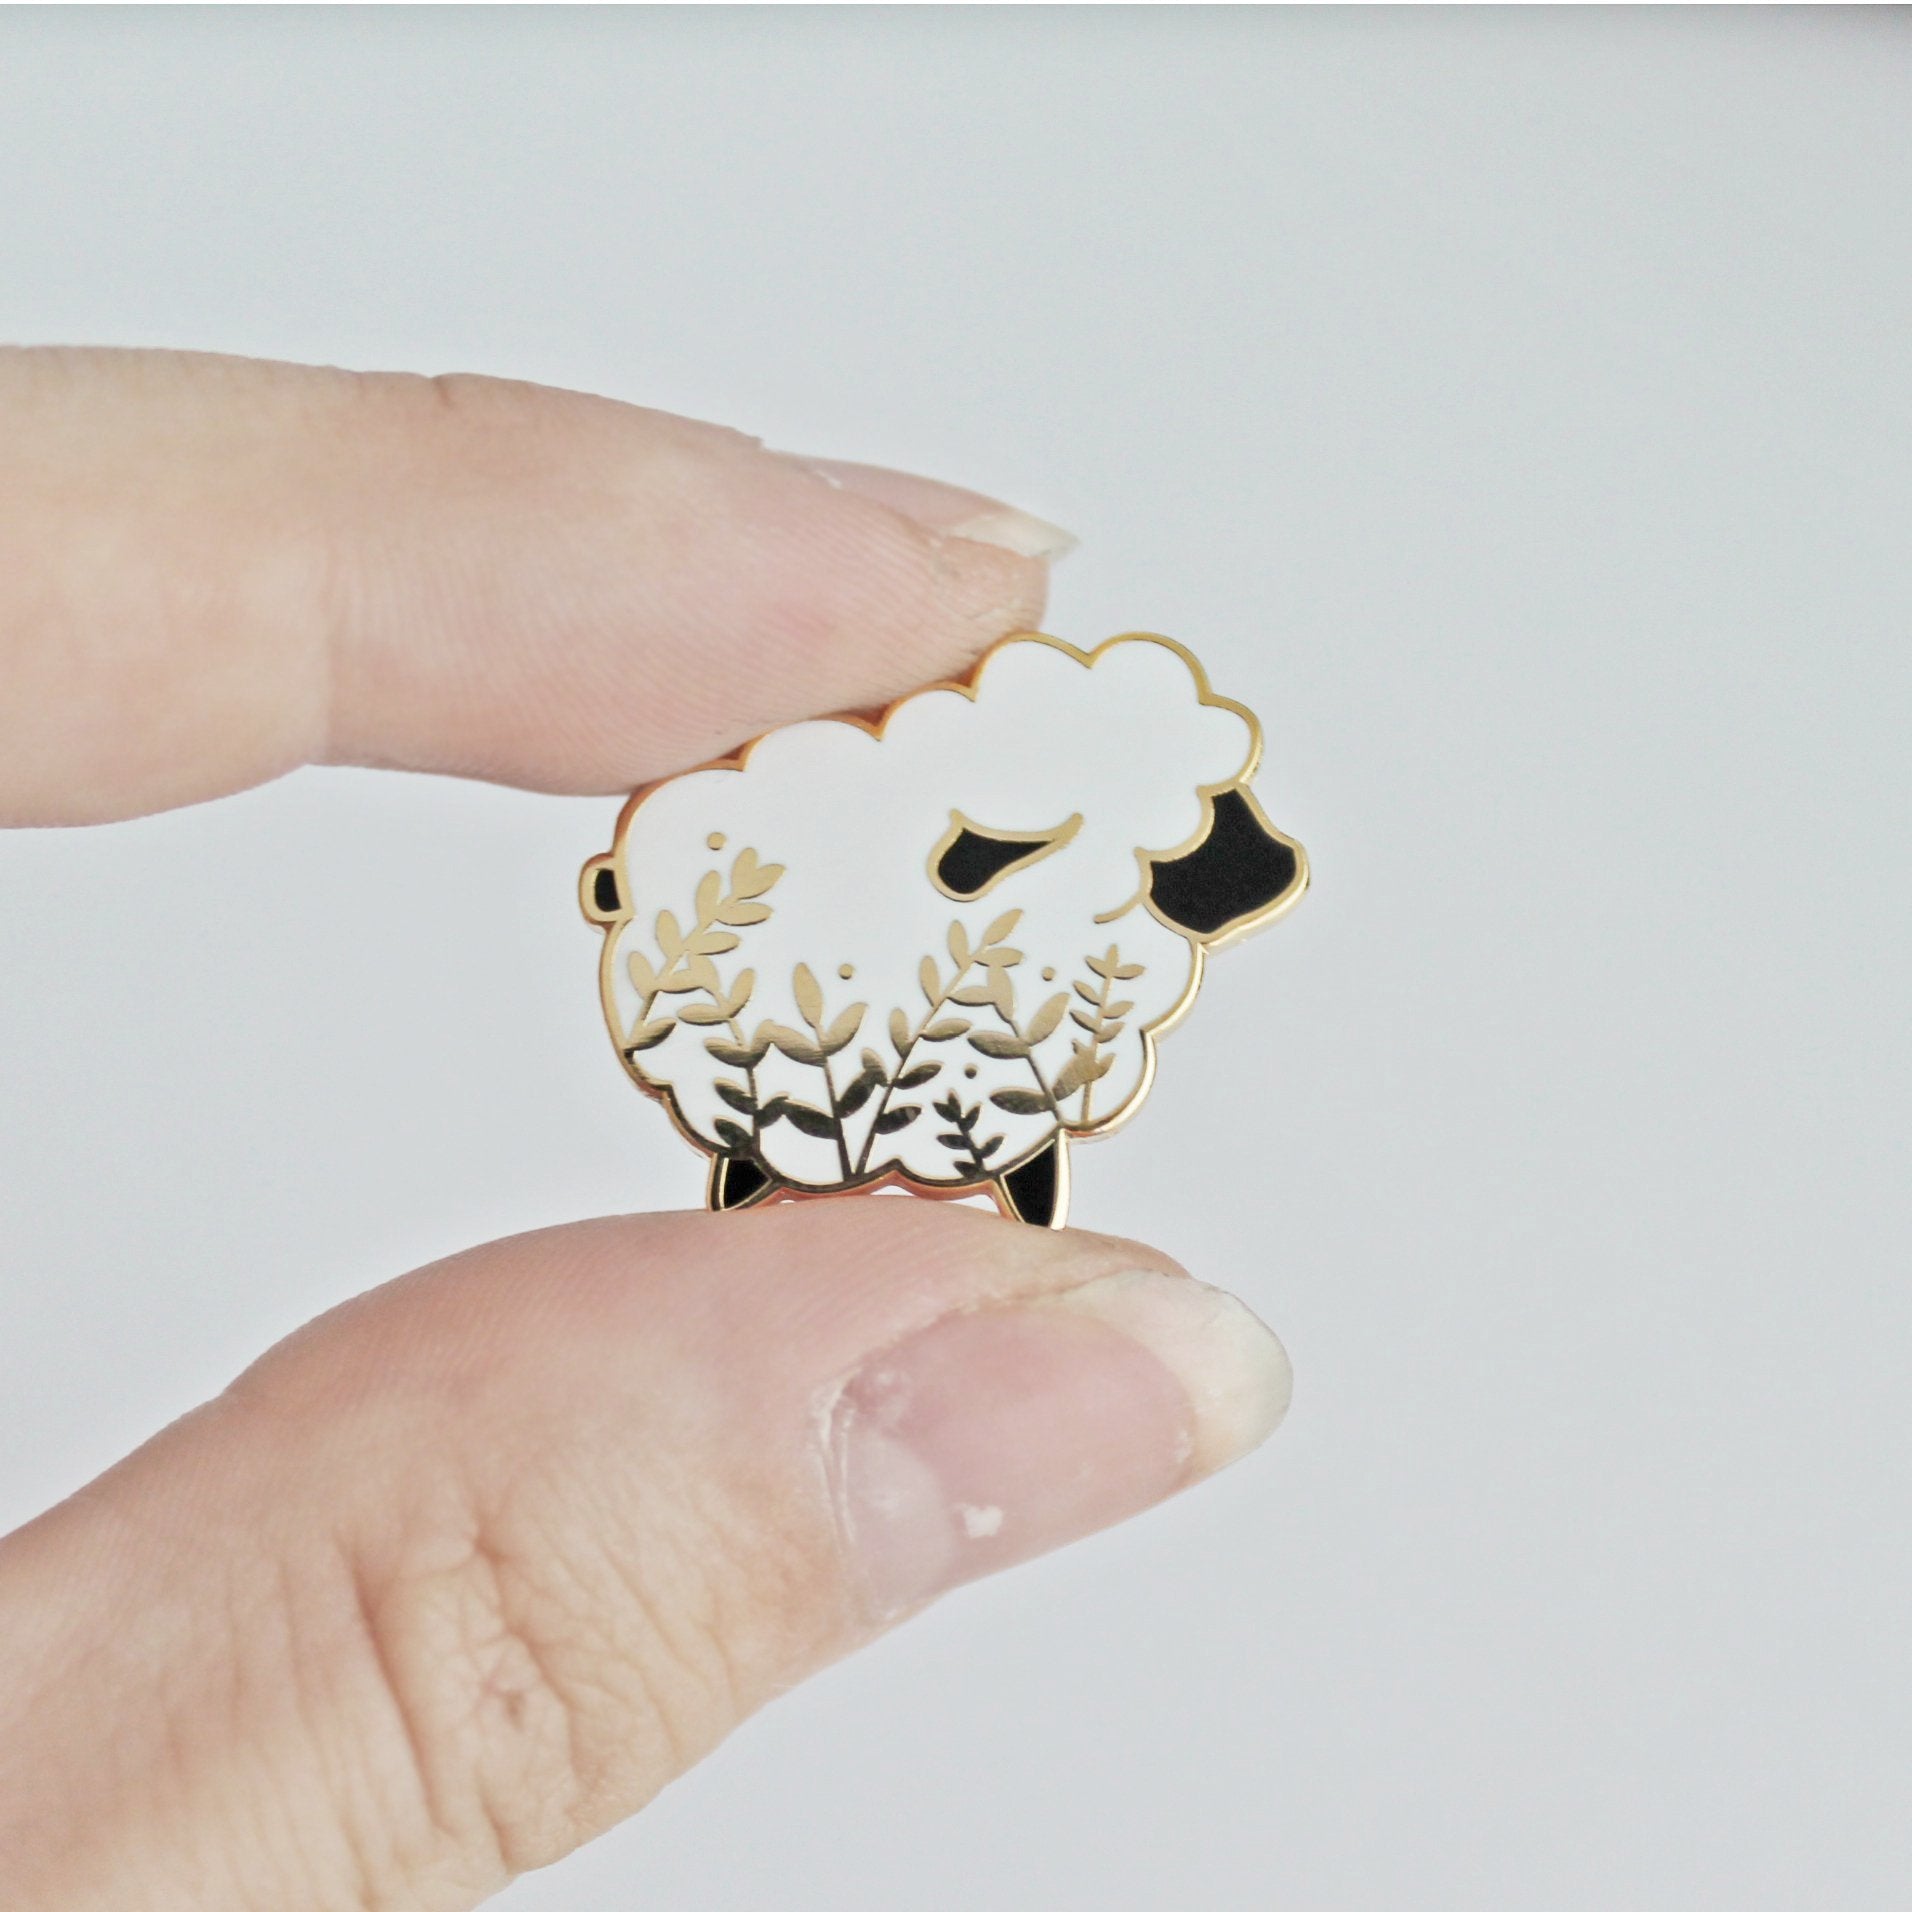 Cute sheep enamel pin with a little floral whimsy. A beautiful pin made for animal lovers, fiber enthusiasts, knitters and crocheters.